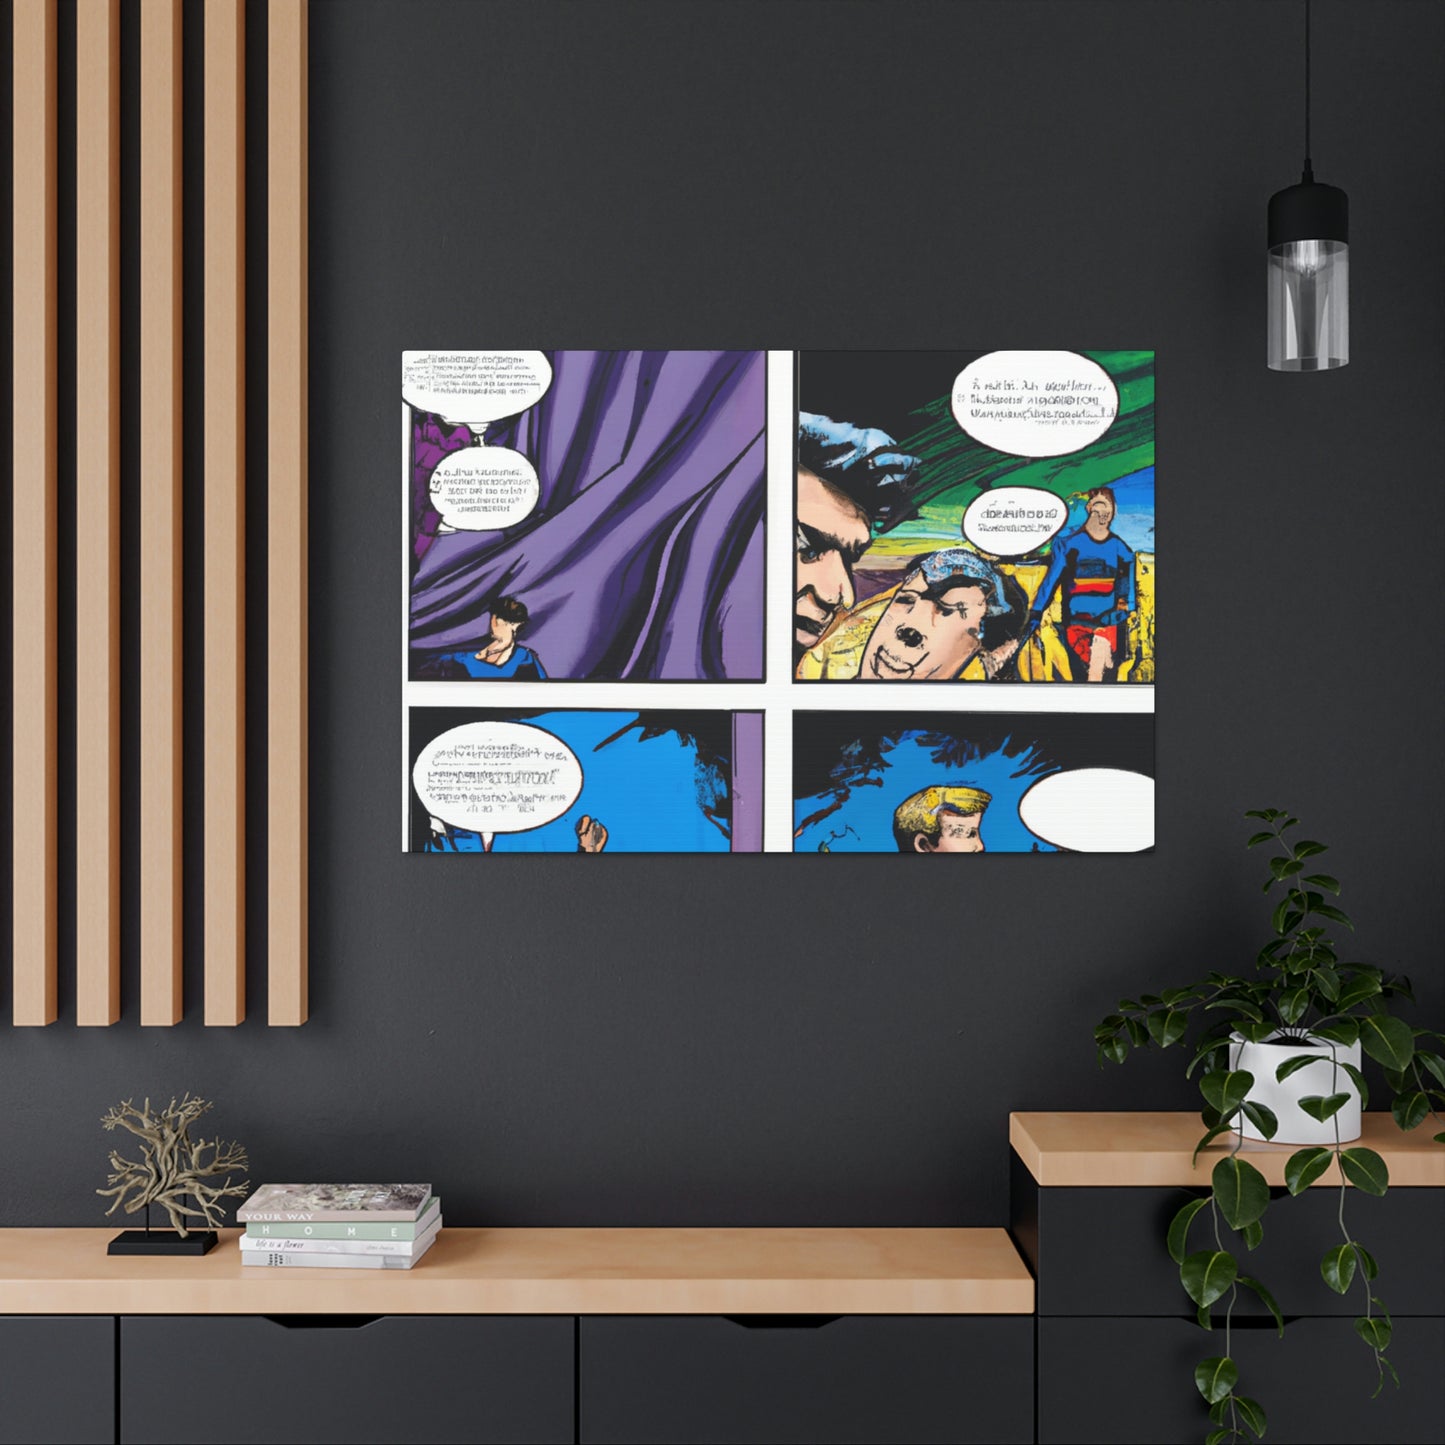 Ray Shooter, the Cosmic Crusher. - Comics Collector Canvas Wall Art For Bedroom Office Living Room